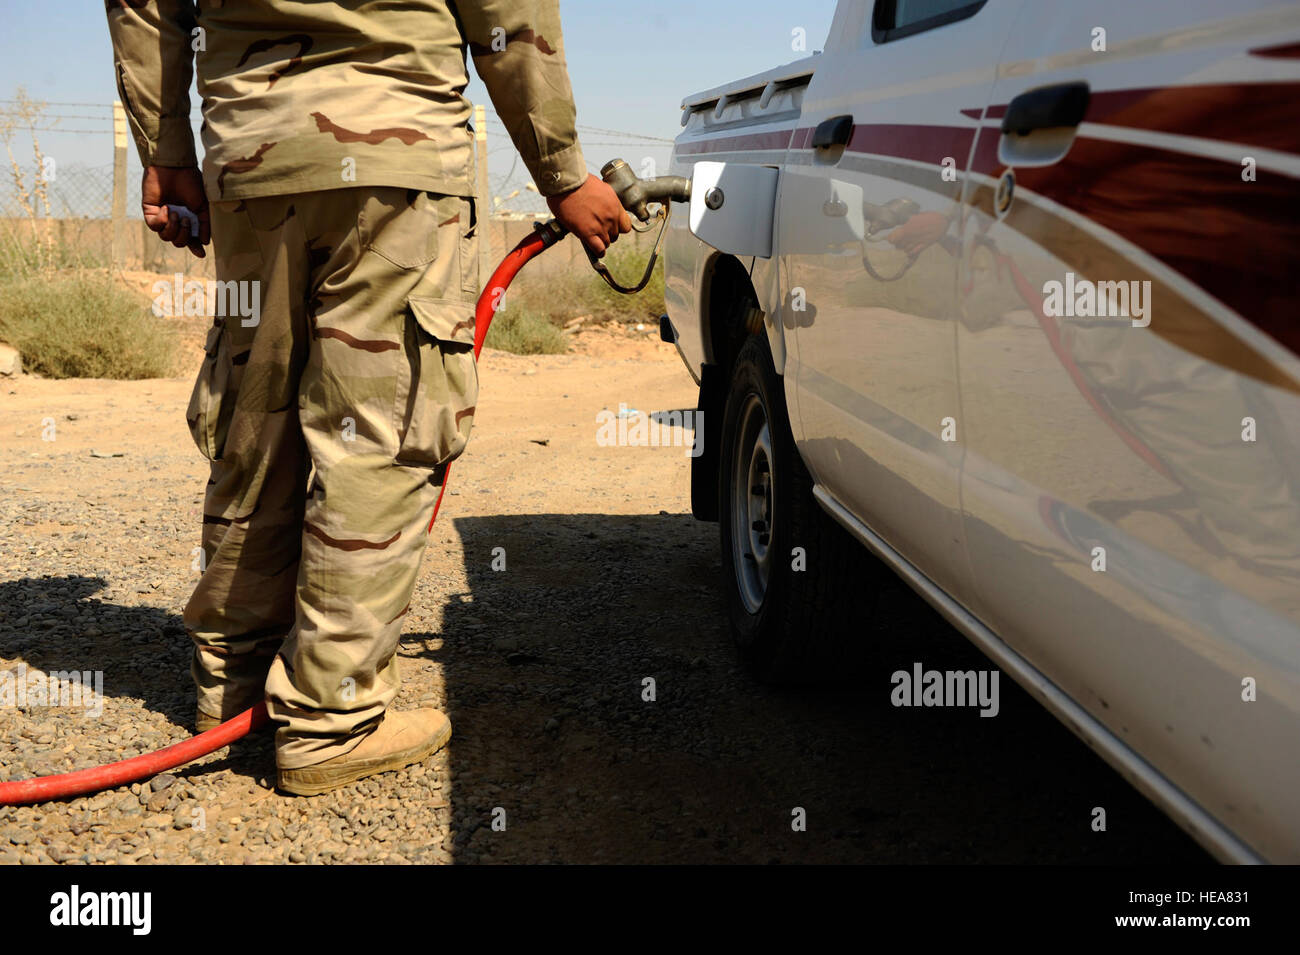 An Iraqi soldier refuels a vehicle at Camp Taji, near Baghdad, Iraq, July 11. The Iraqi fuels depot is run exclusively by the Iraqi army with some assistance from an American Airman assigned to the Logistics Military Advisor Team. Stock Photo